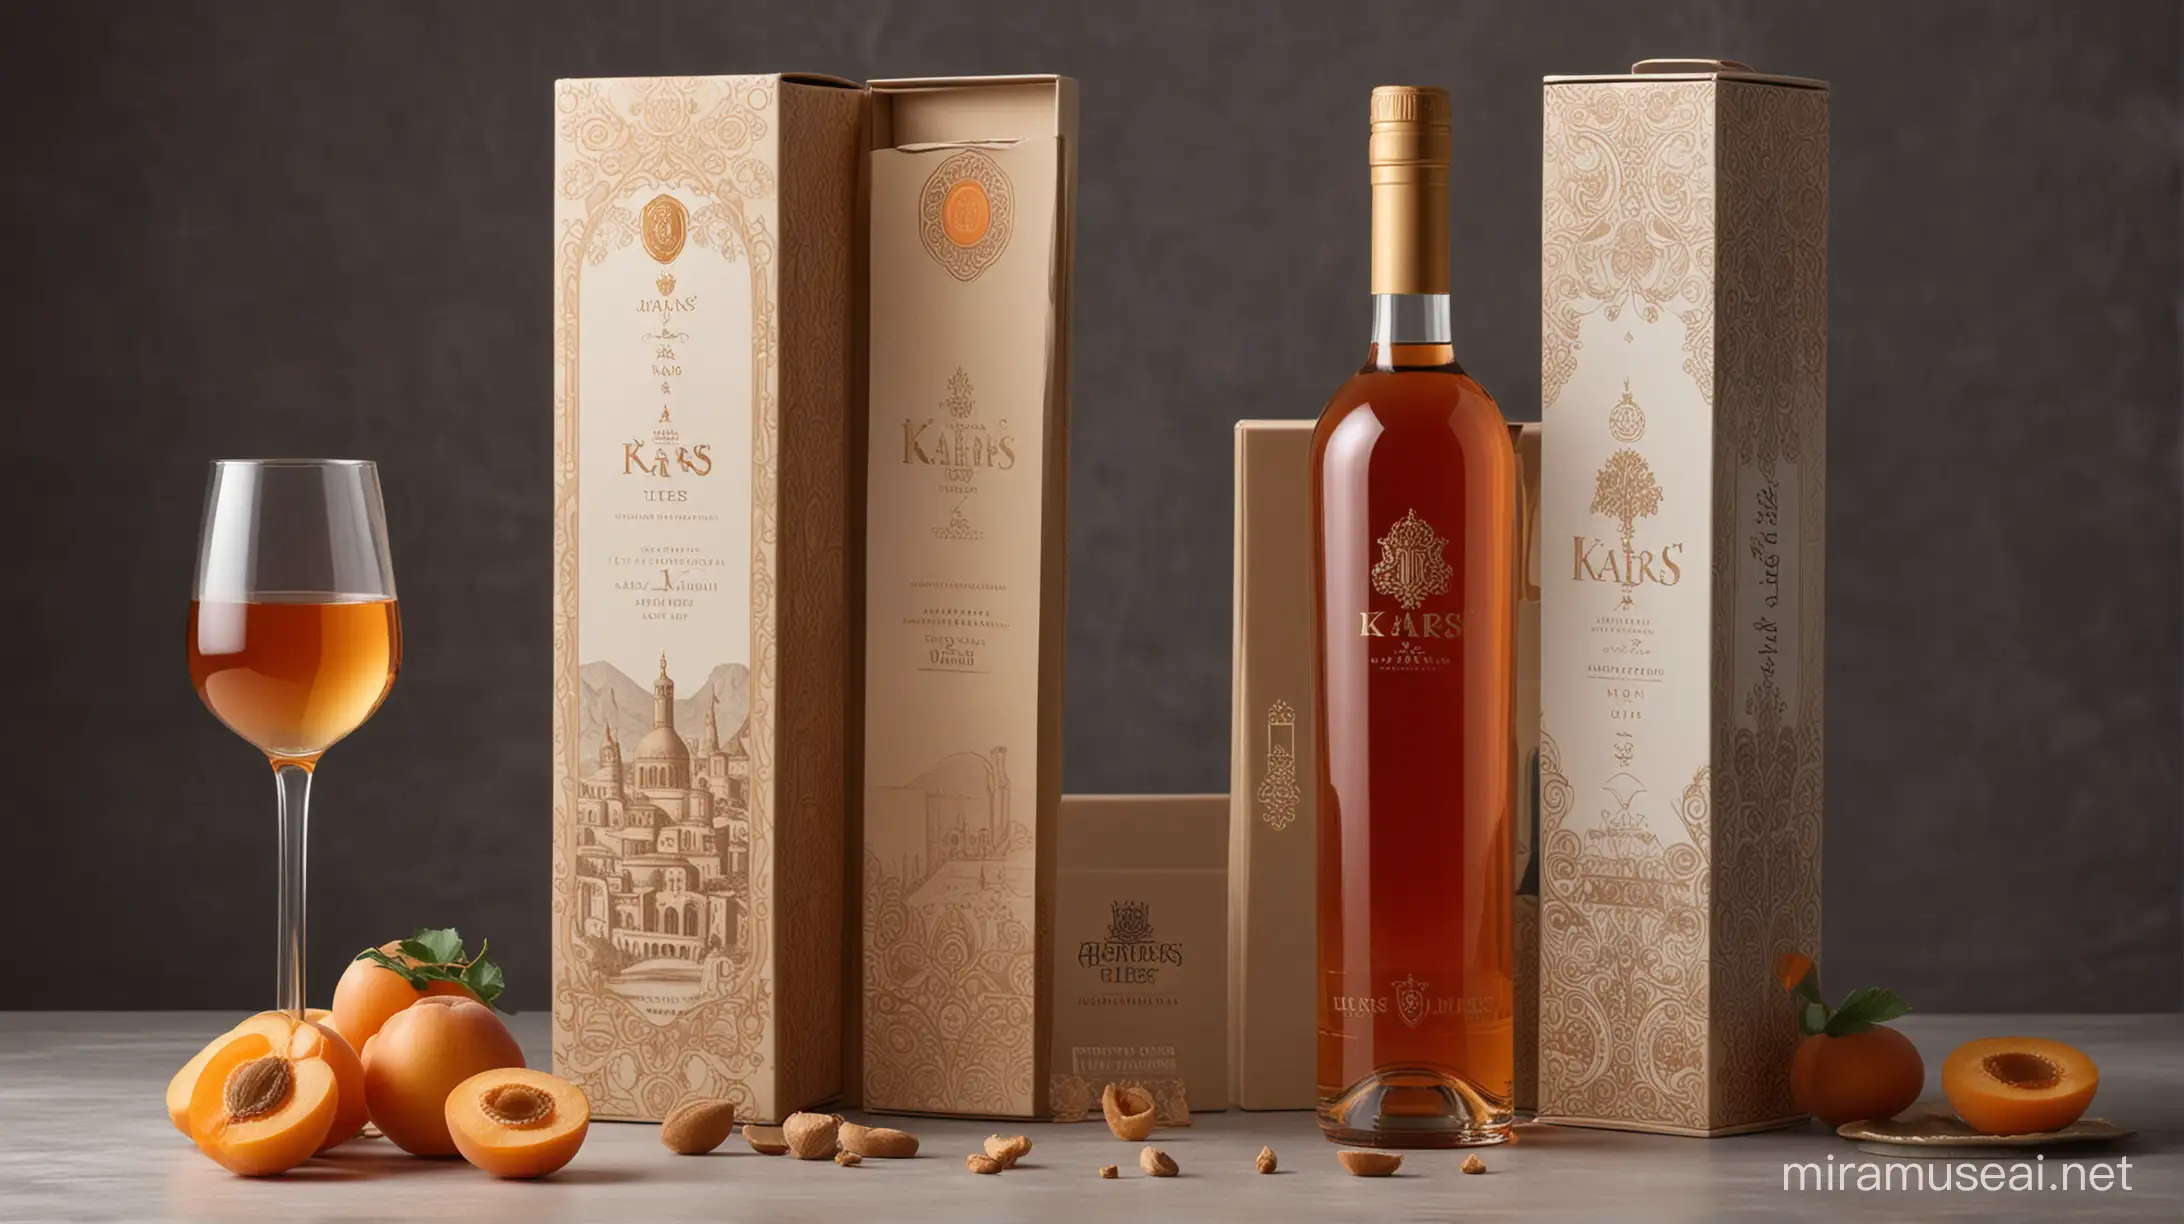 A luxurious bottle and box of Armenian Apricot wine from royal times with modern and exclusive style packaging, called "KARS"